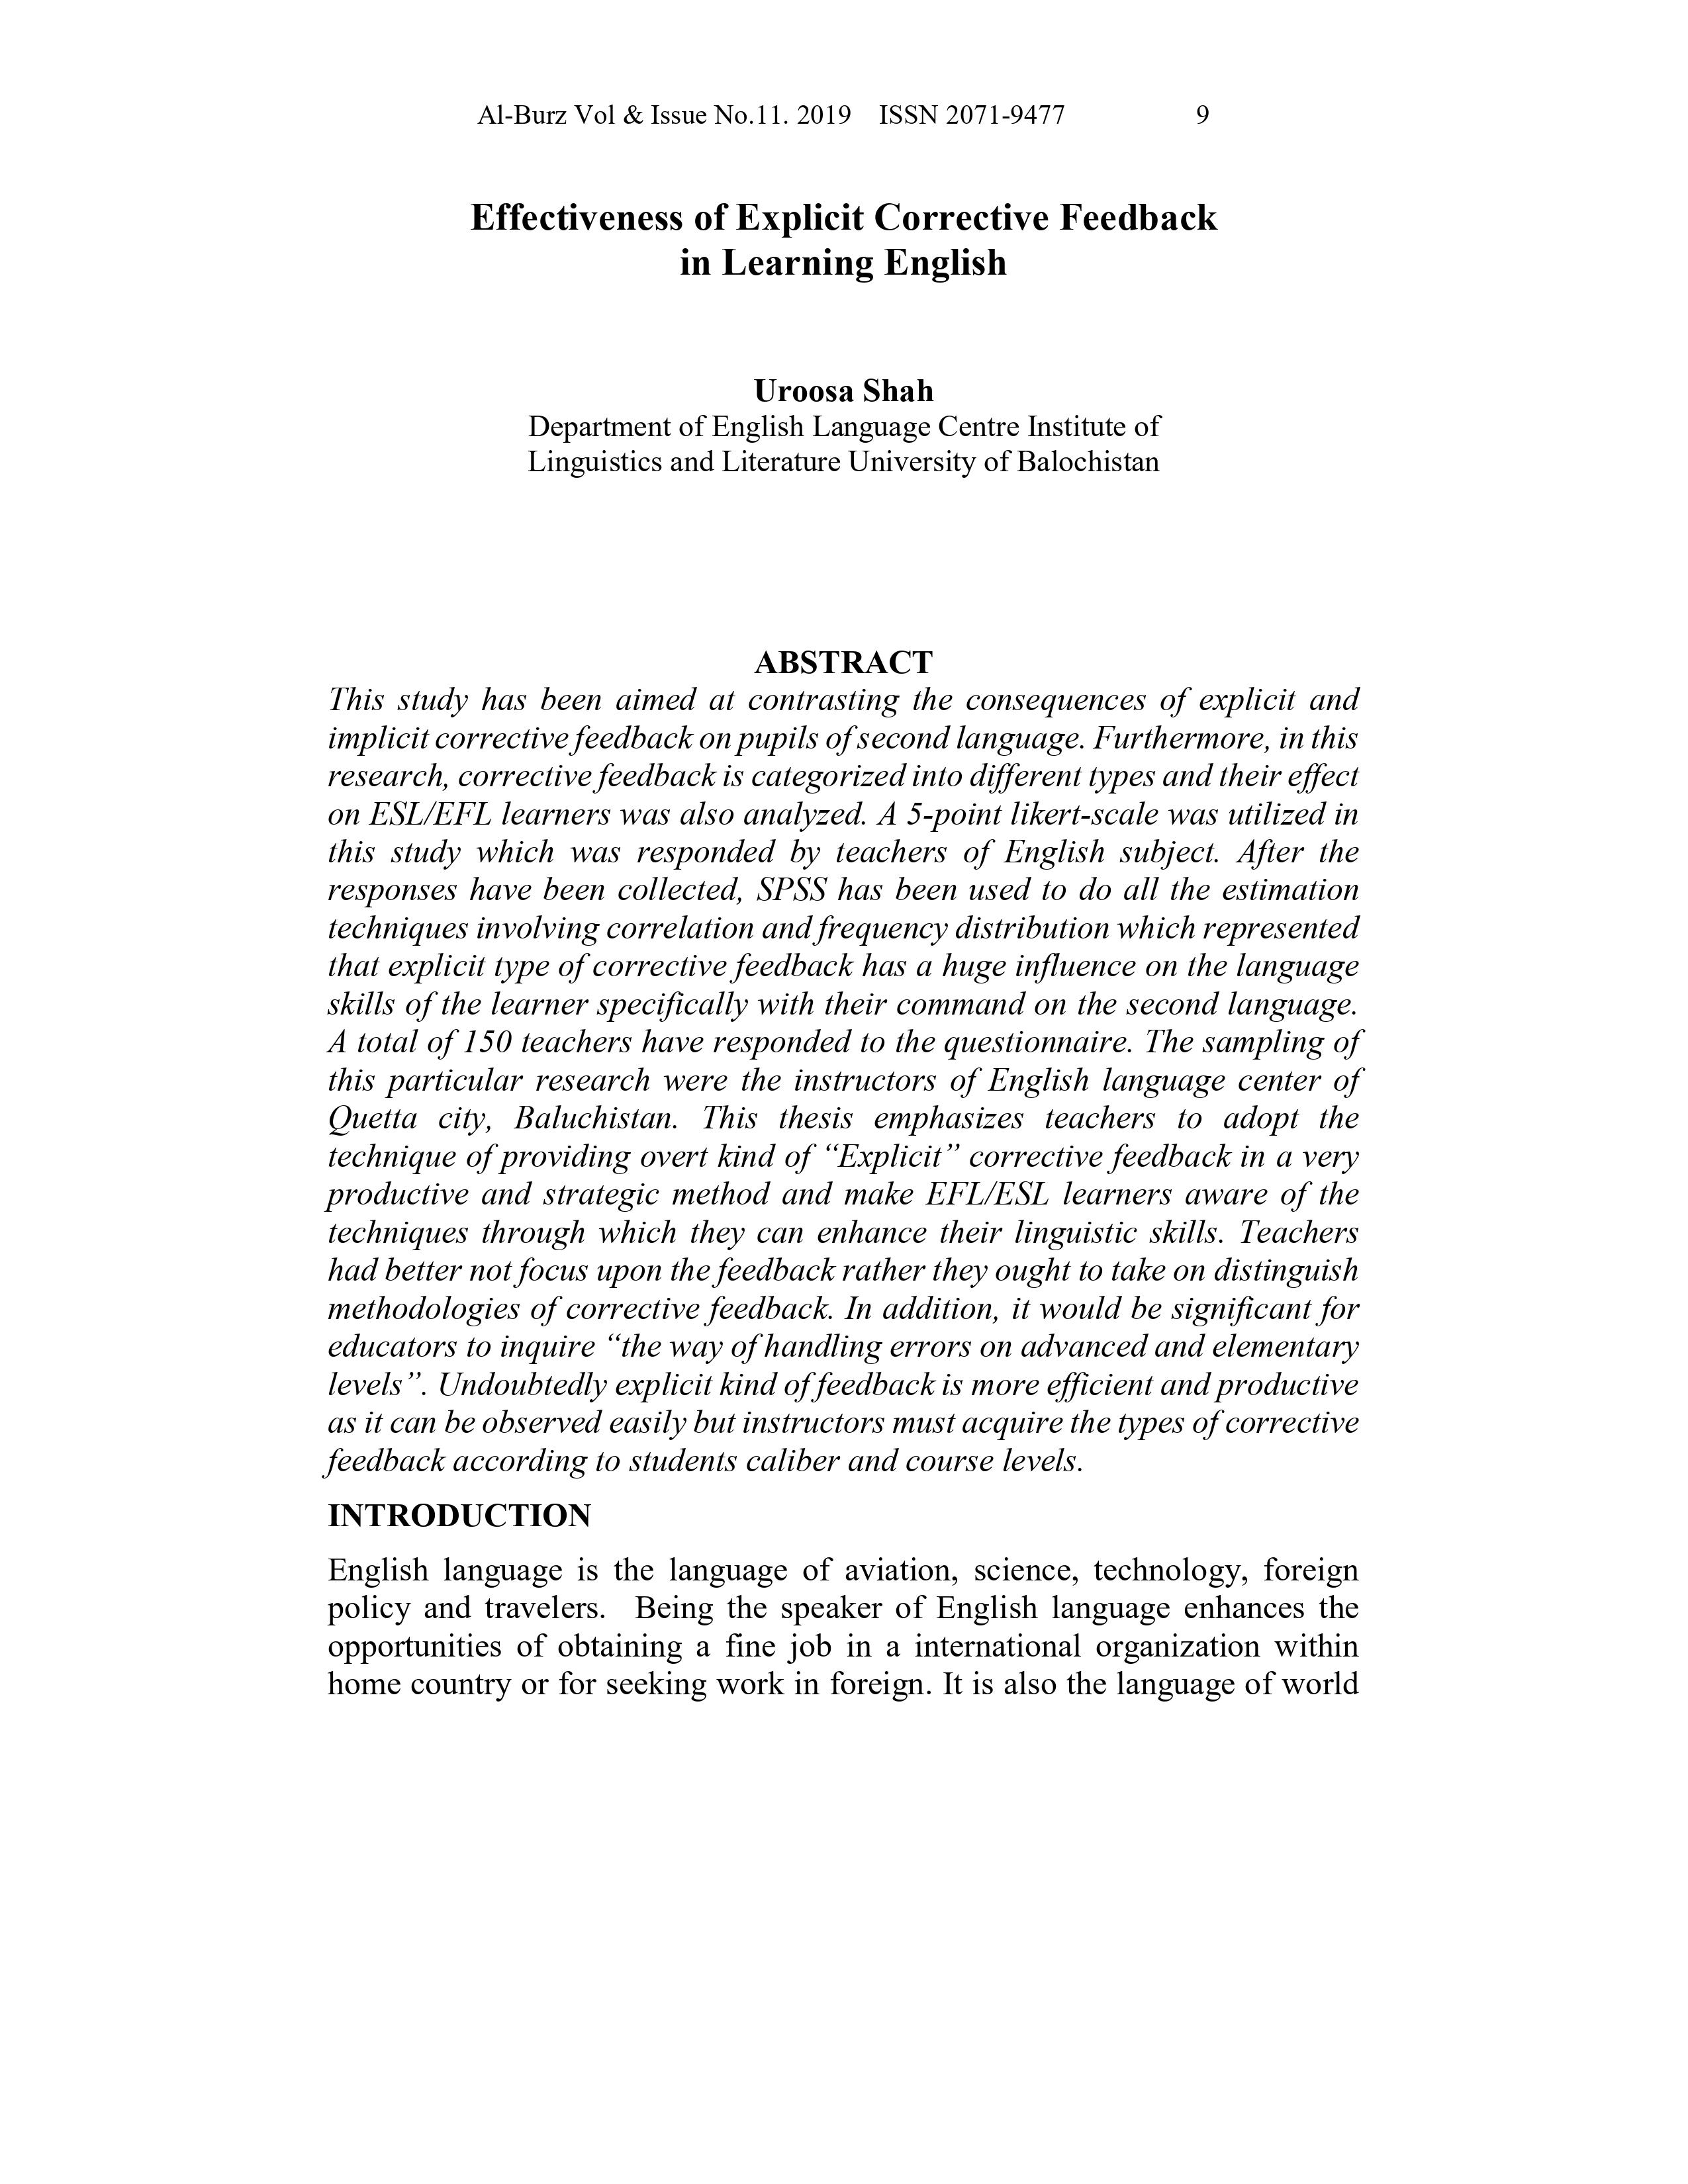 Effectiveness of Explicit Corrective Feedback in Learning English